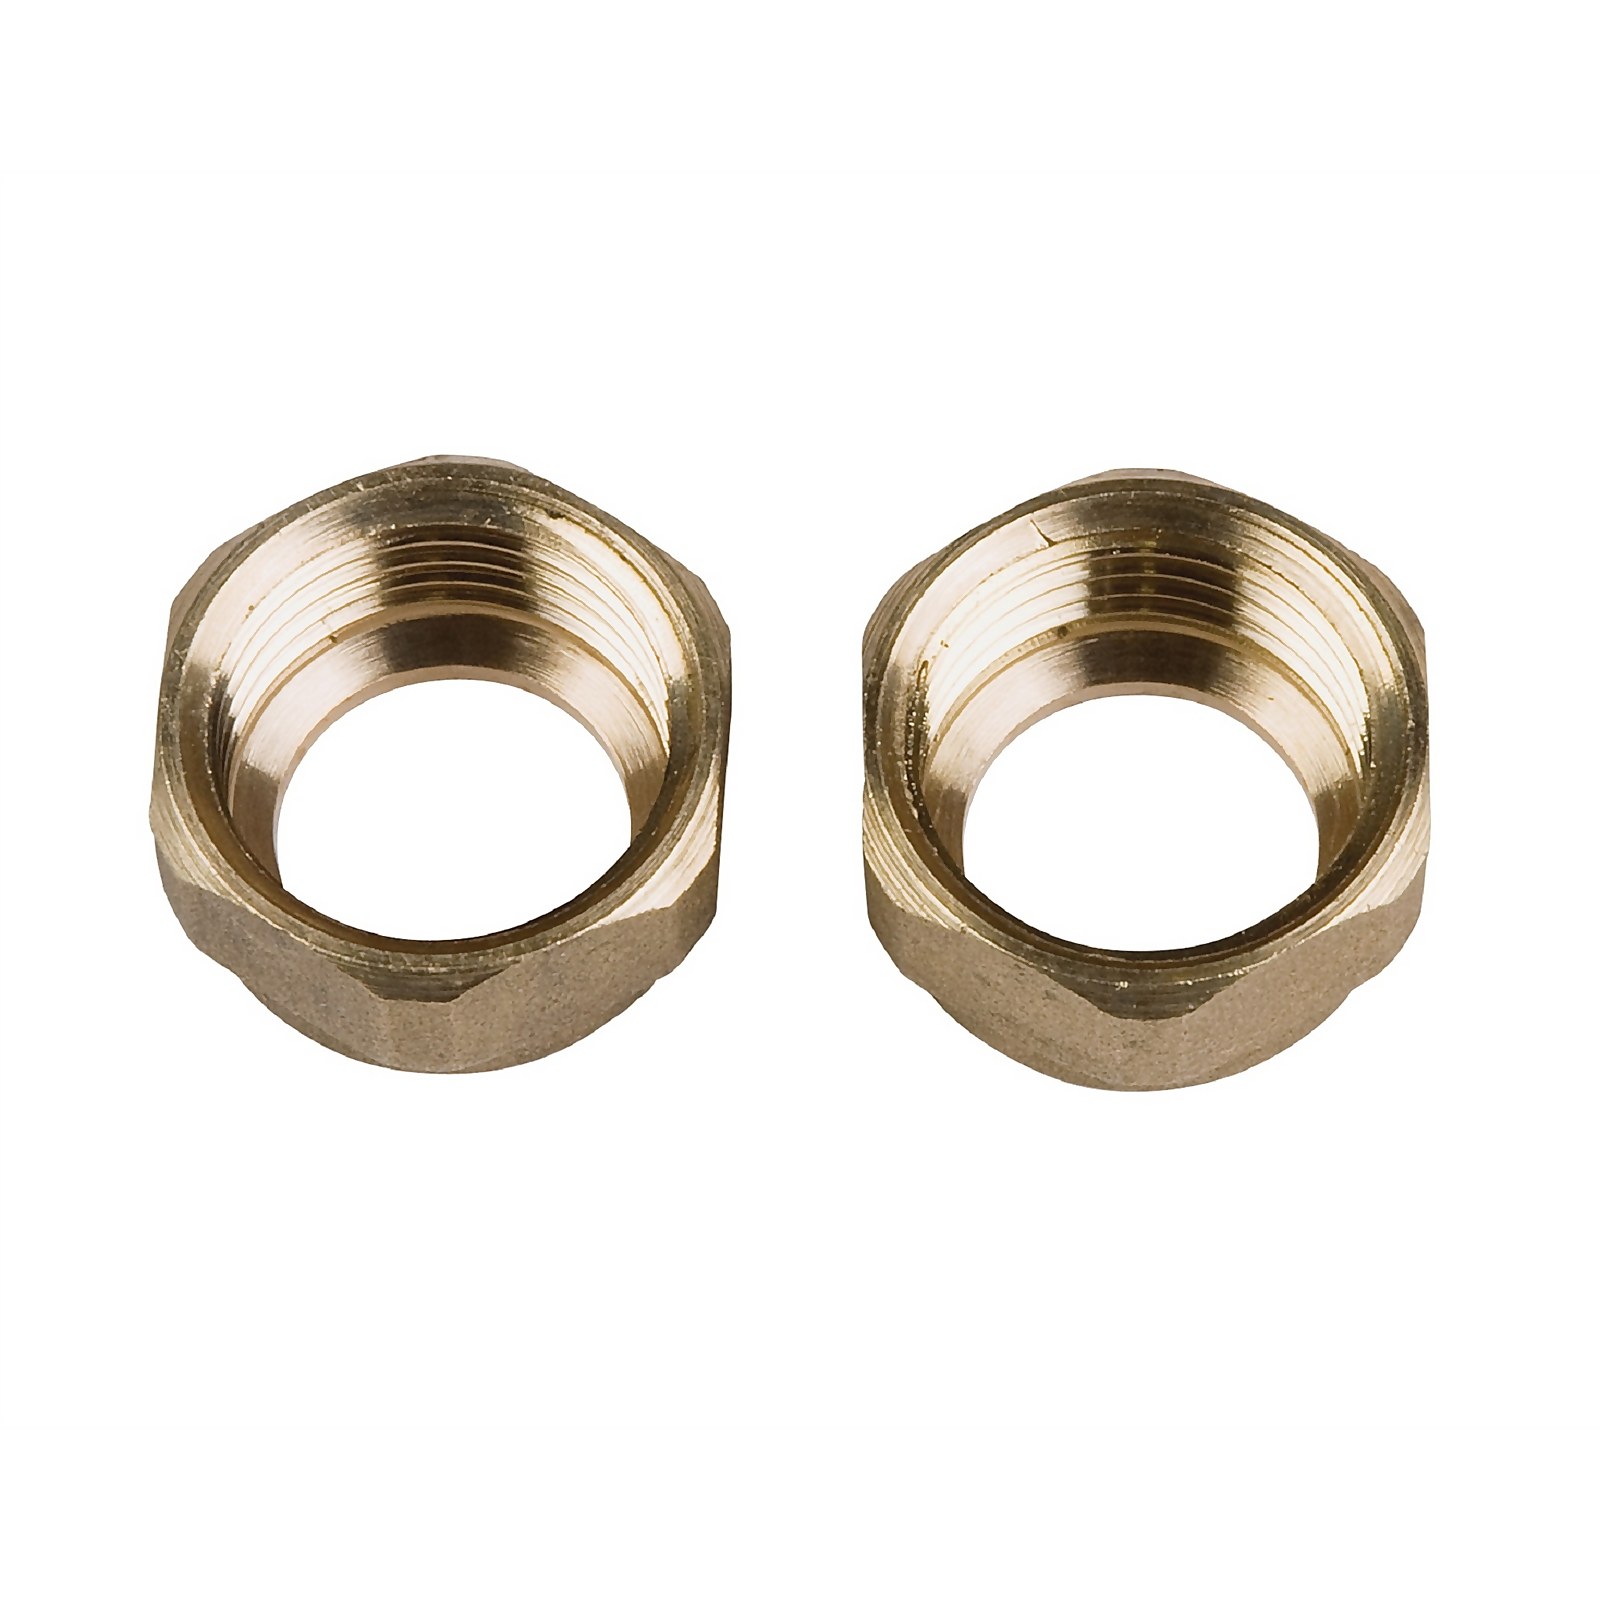 Photo of Compression Nut - Brass - 15mm - 2 Pack